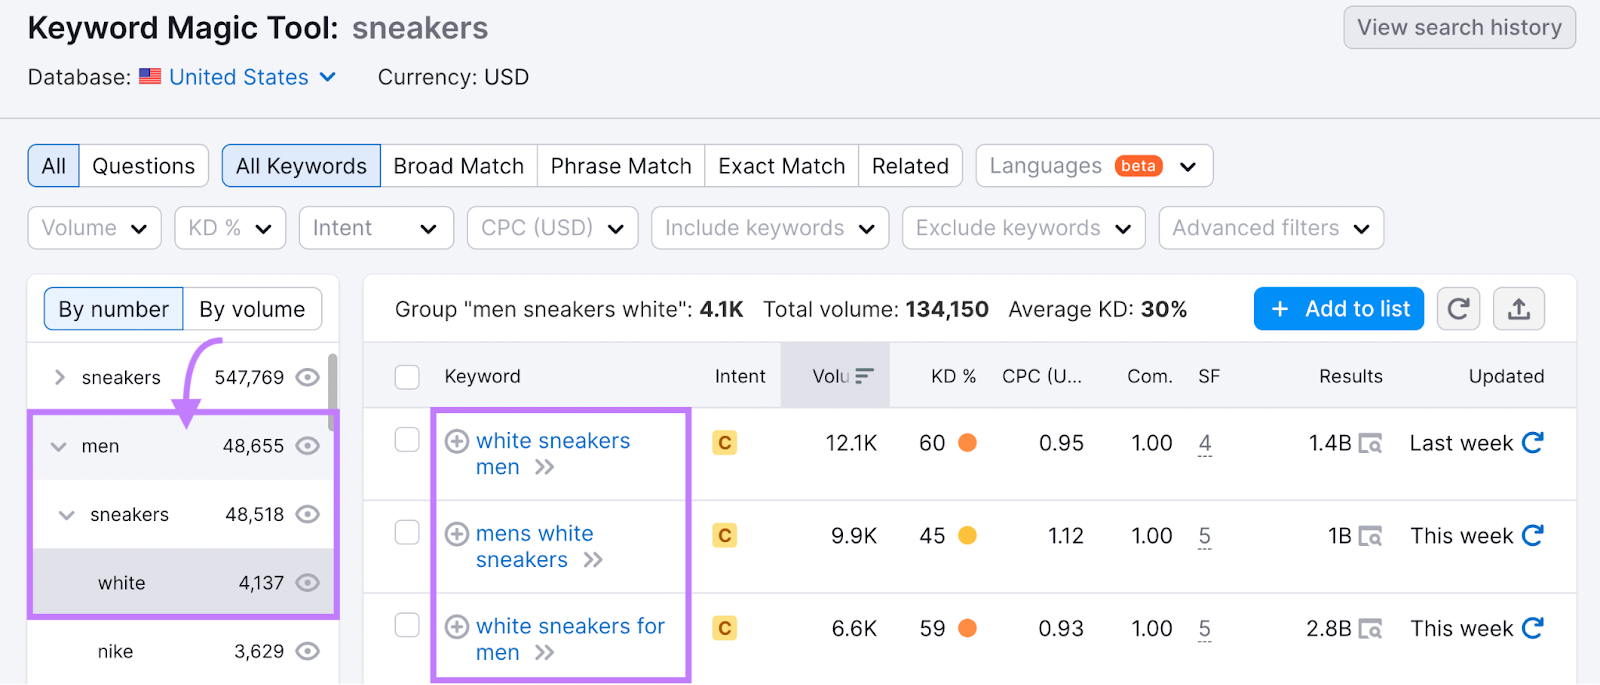 "men," "sneakers," and "white" groups and subgroups highlighted to the left of the keyword table in Keyword Magic Tool